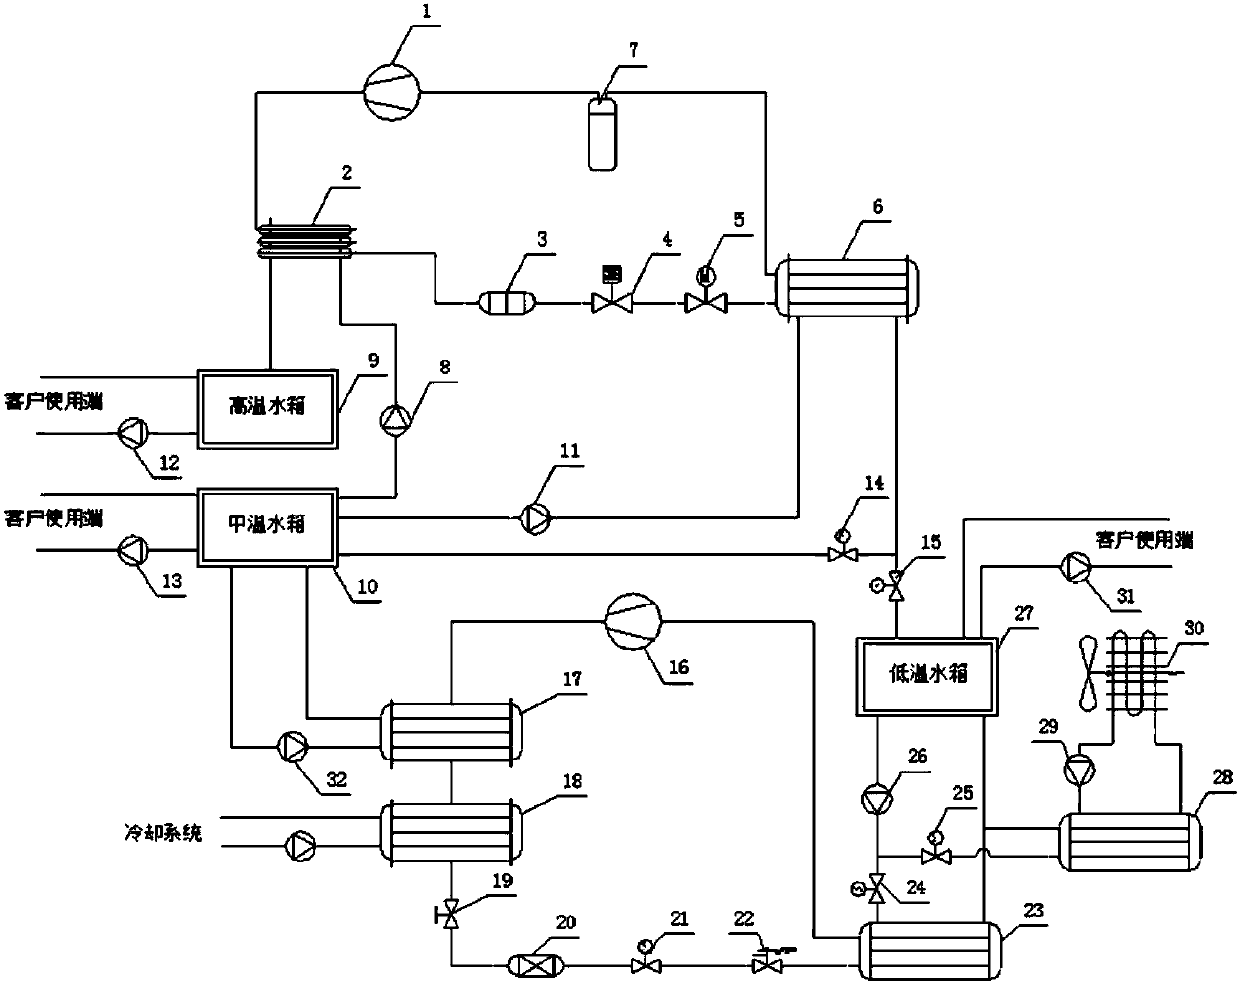 A comprehensive energy-saving system for industrial chillers and its intelligent control method